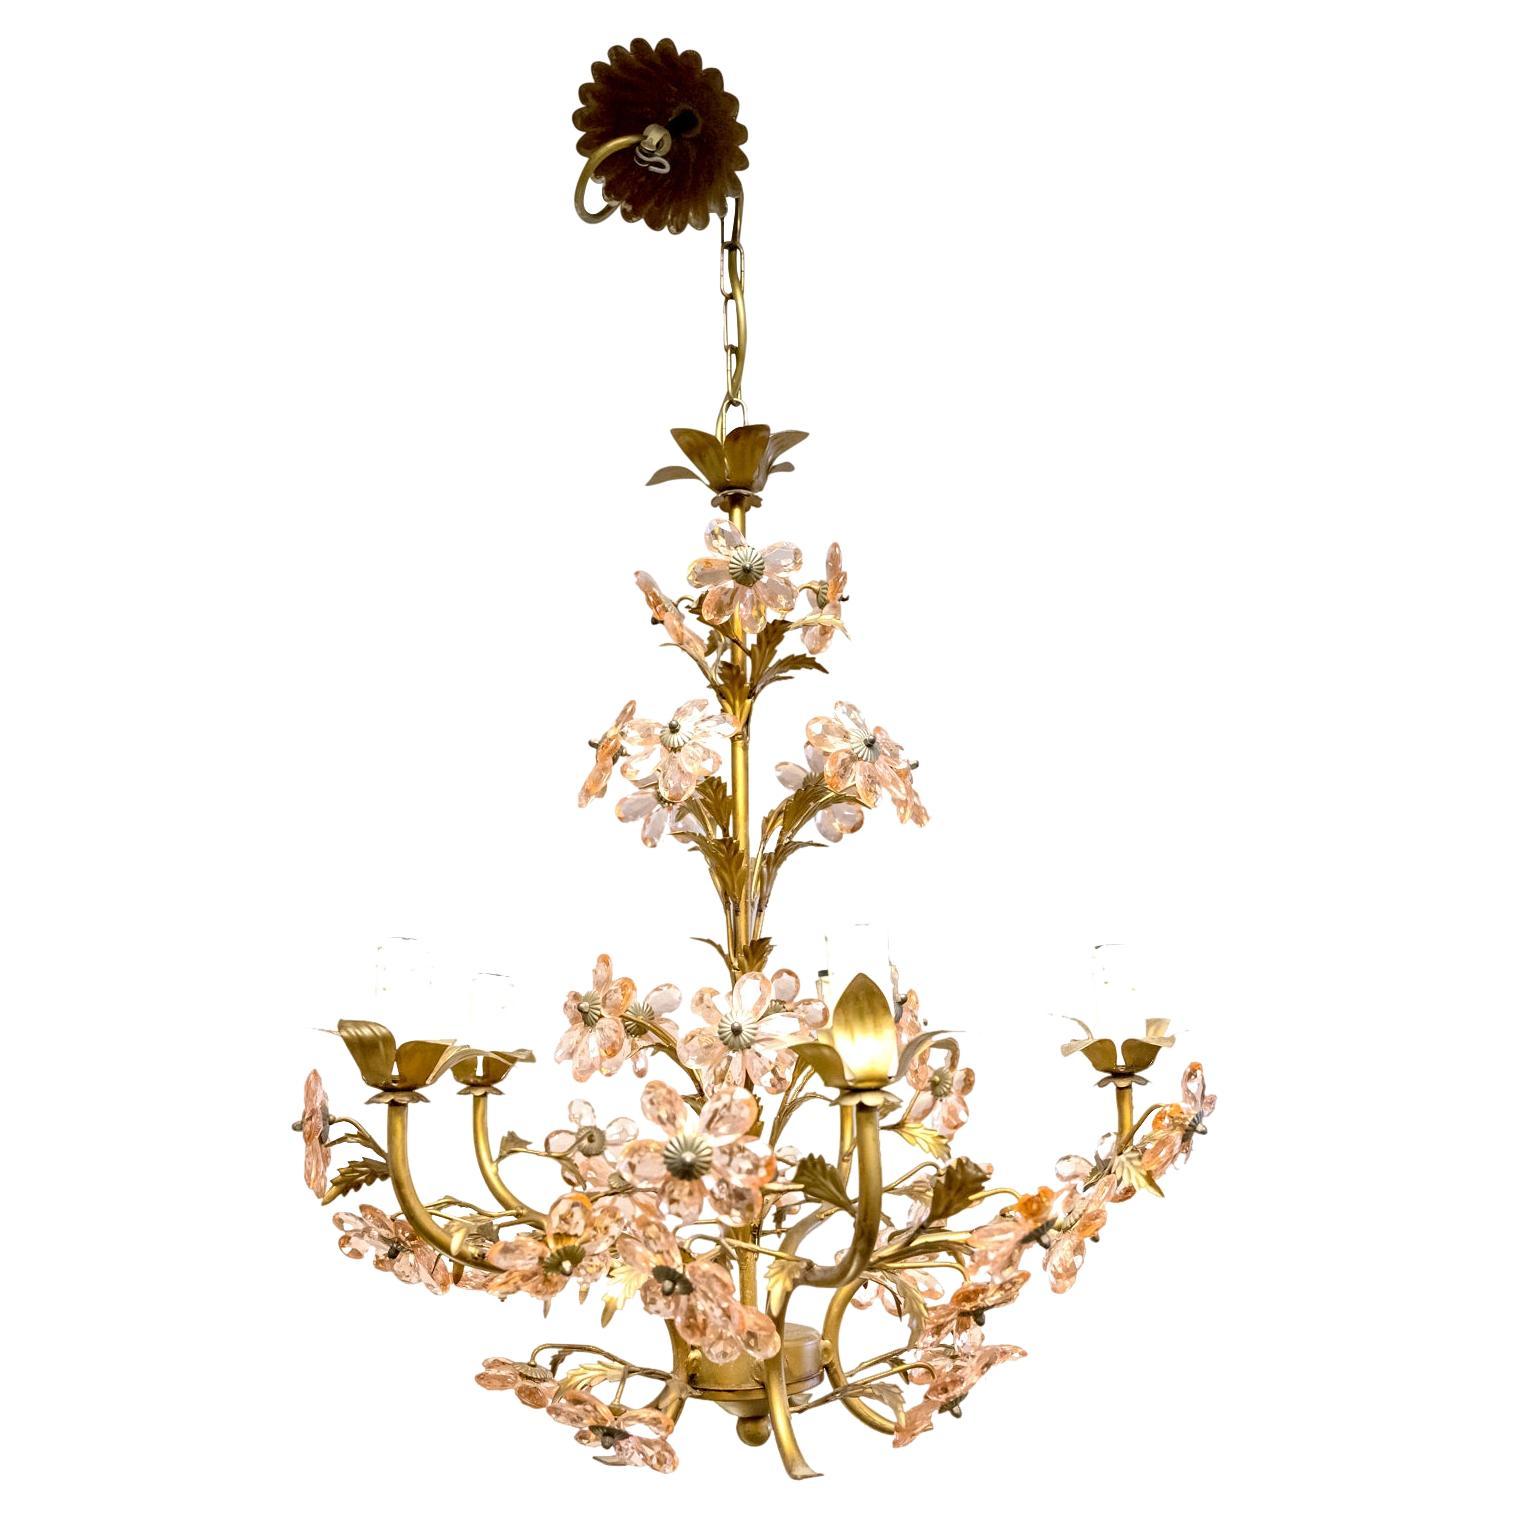 French Louis XV Style 5light Gilt Iron & Crystal Flower Maison Bagues Chandelier For Sale